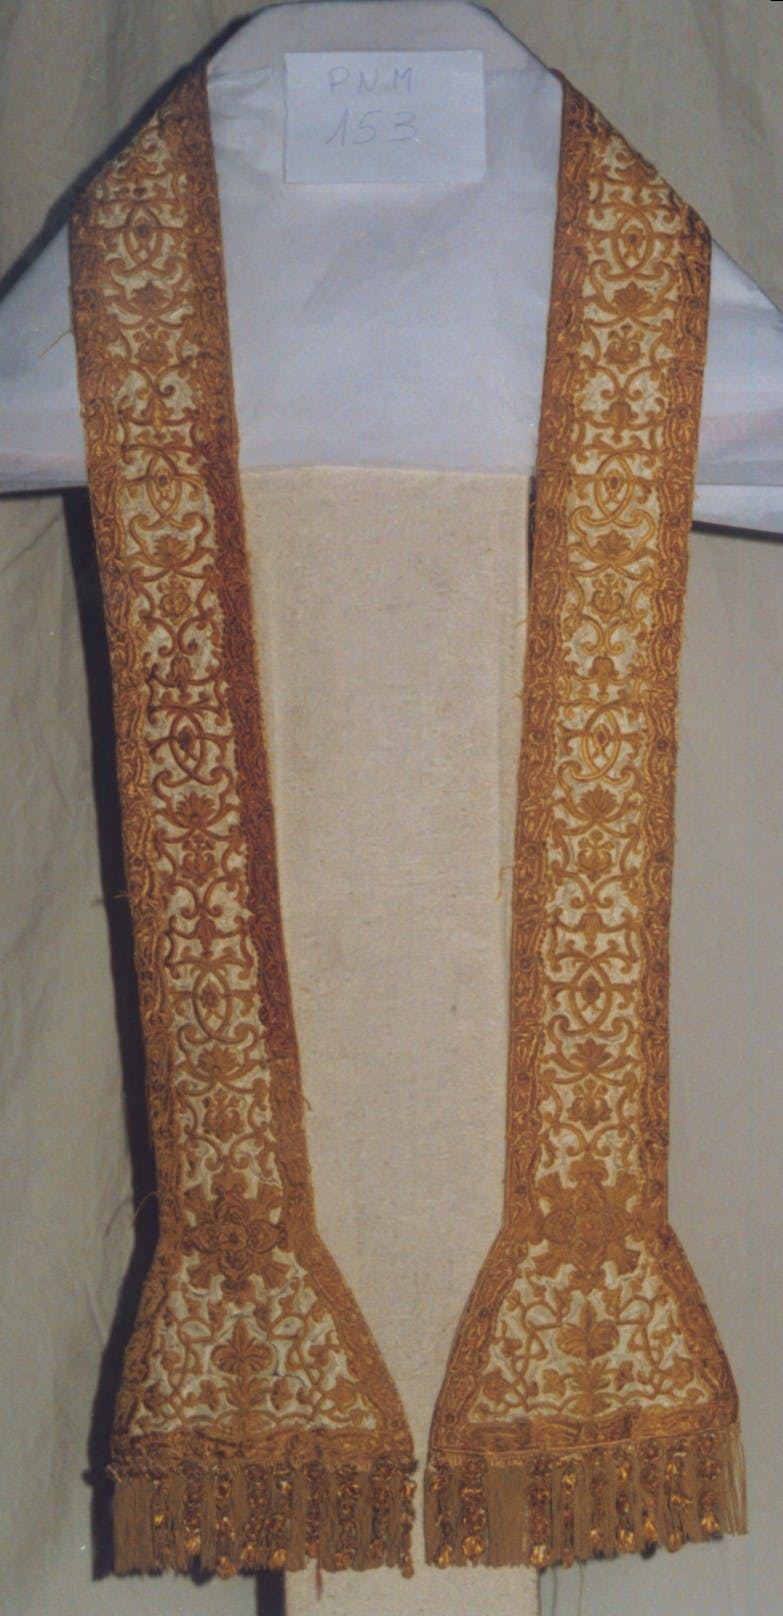 Vestments from the first half of the 18th century, National Mafra Convent and Palace